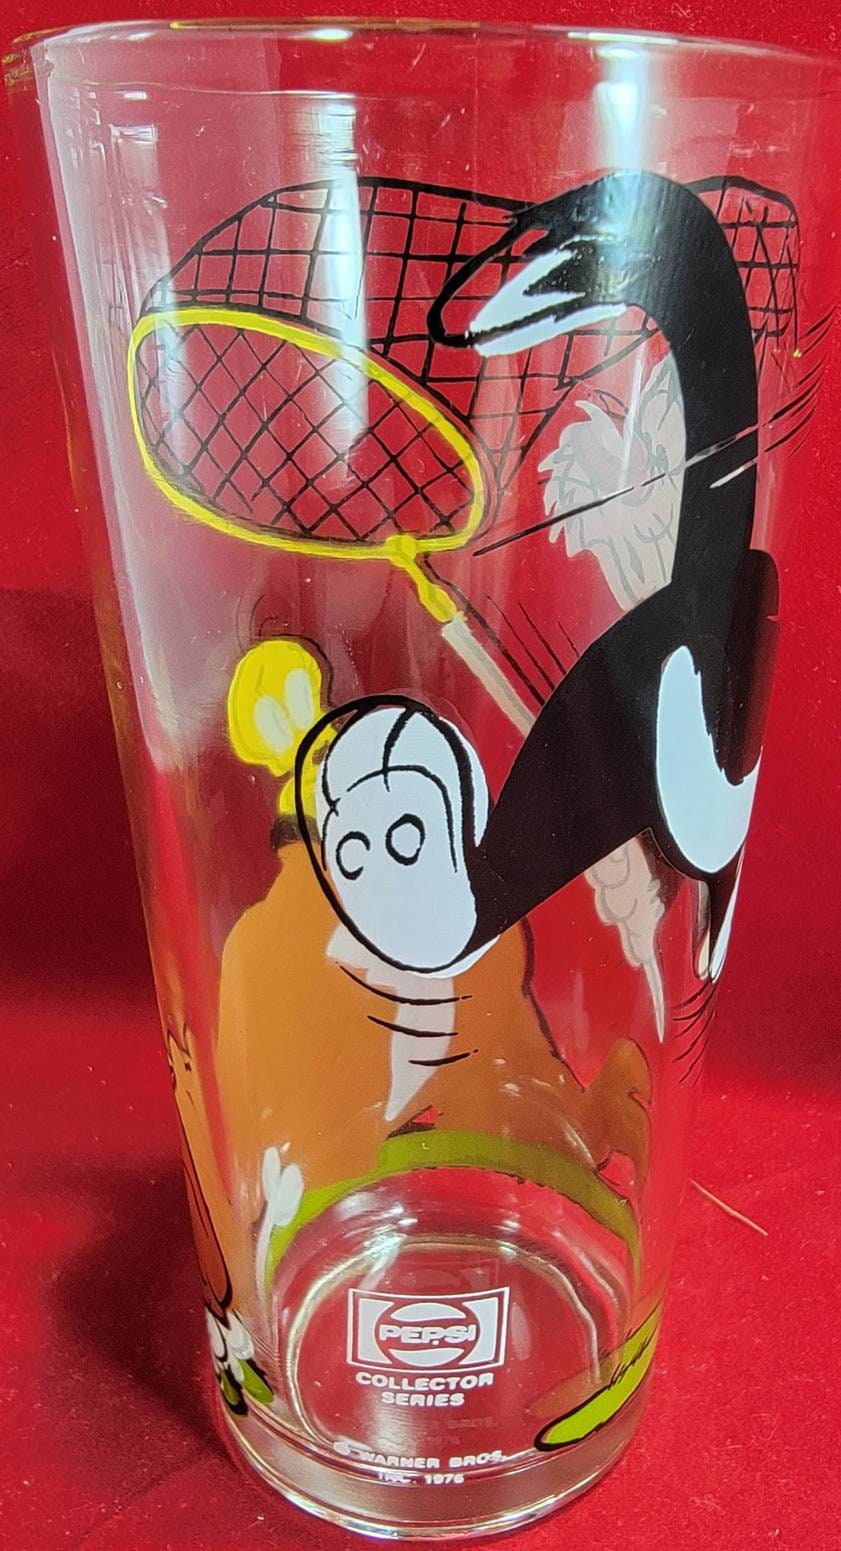 Pepsi glass with Sylvester and tweety bird glass (1976)